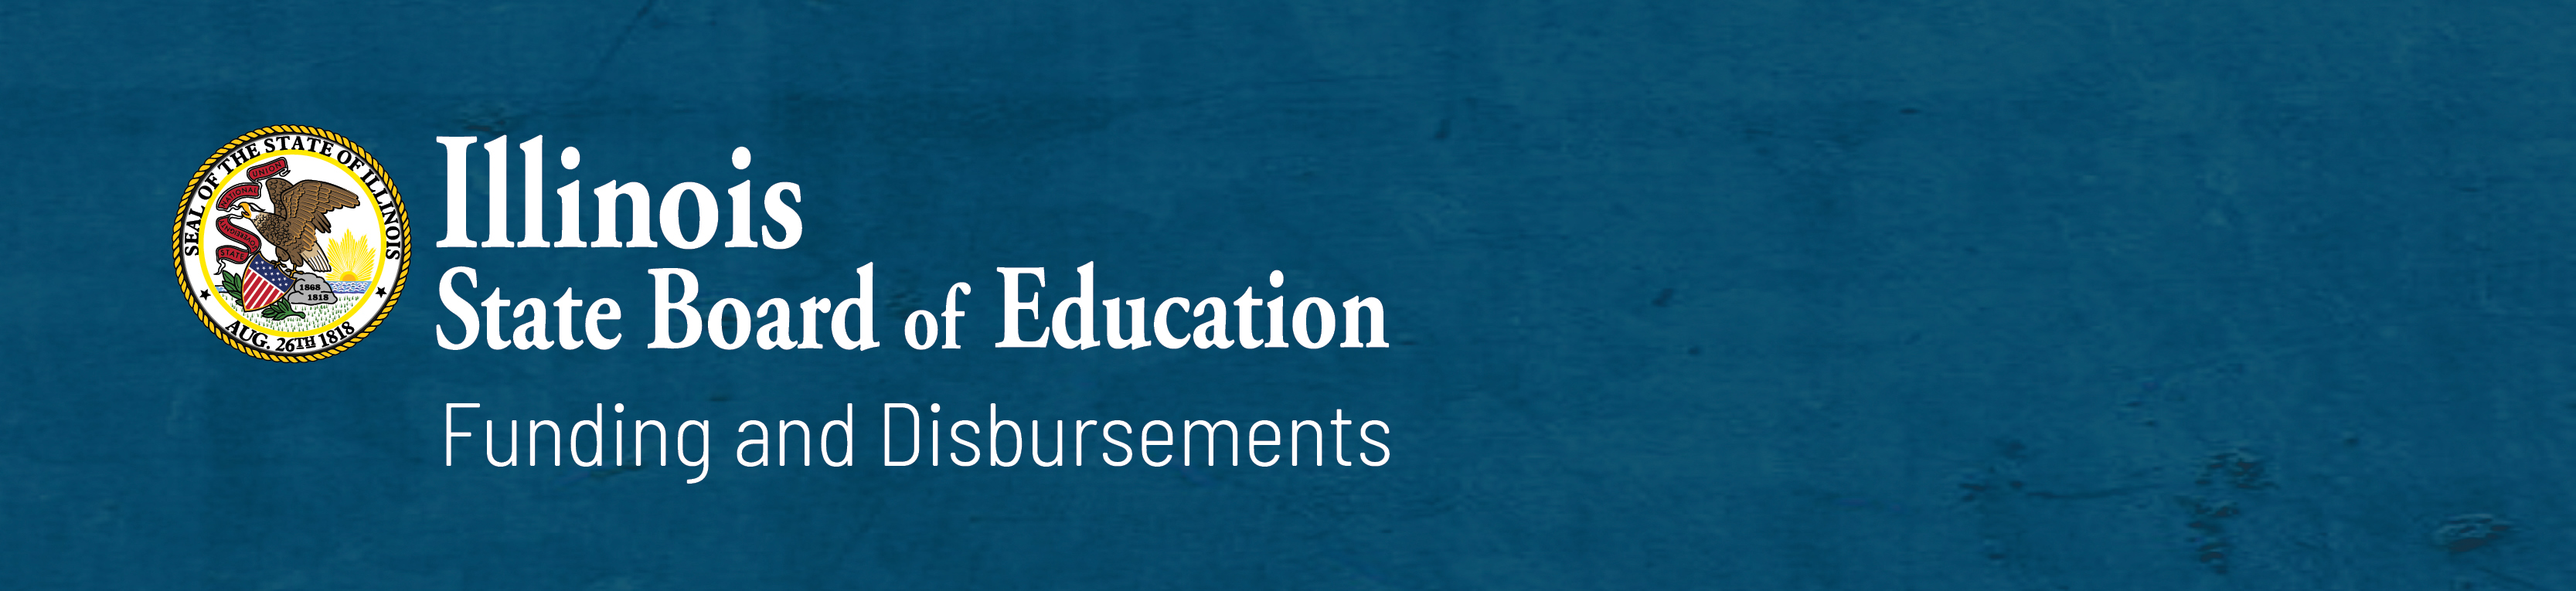 Illinois State Board of Education: Funding and Disbursements